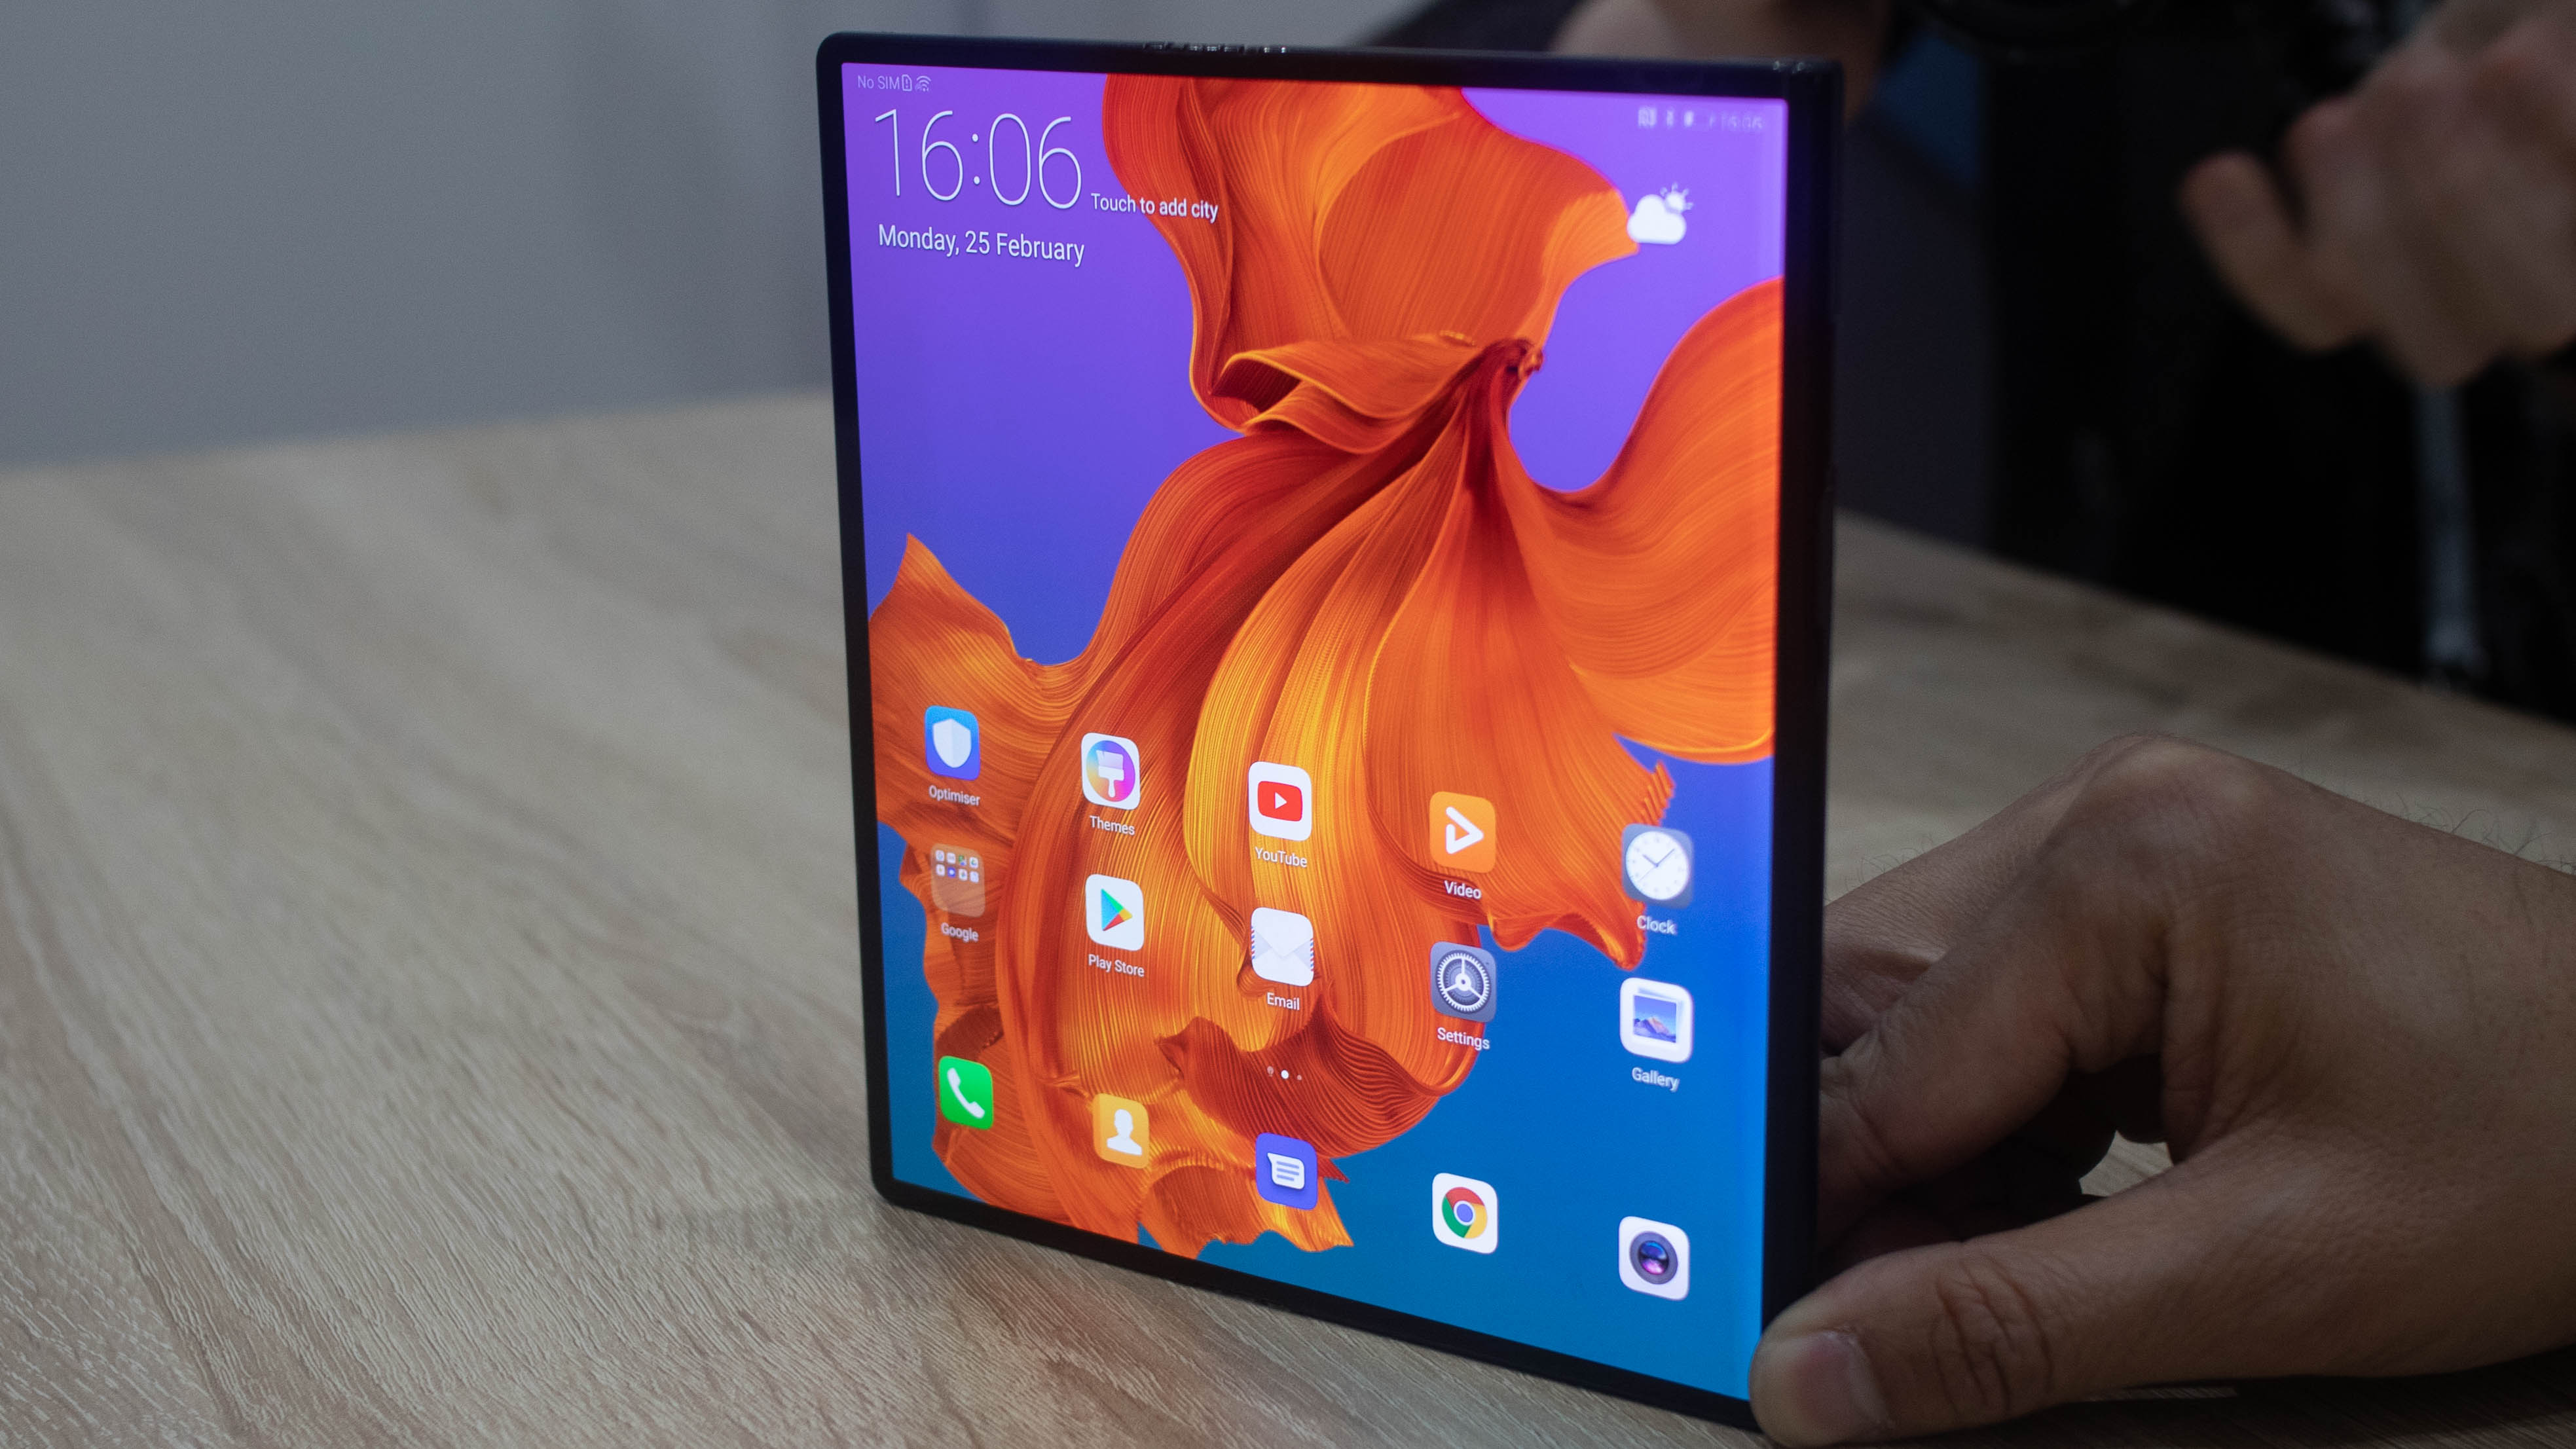 The 8-inch tablet screen